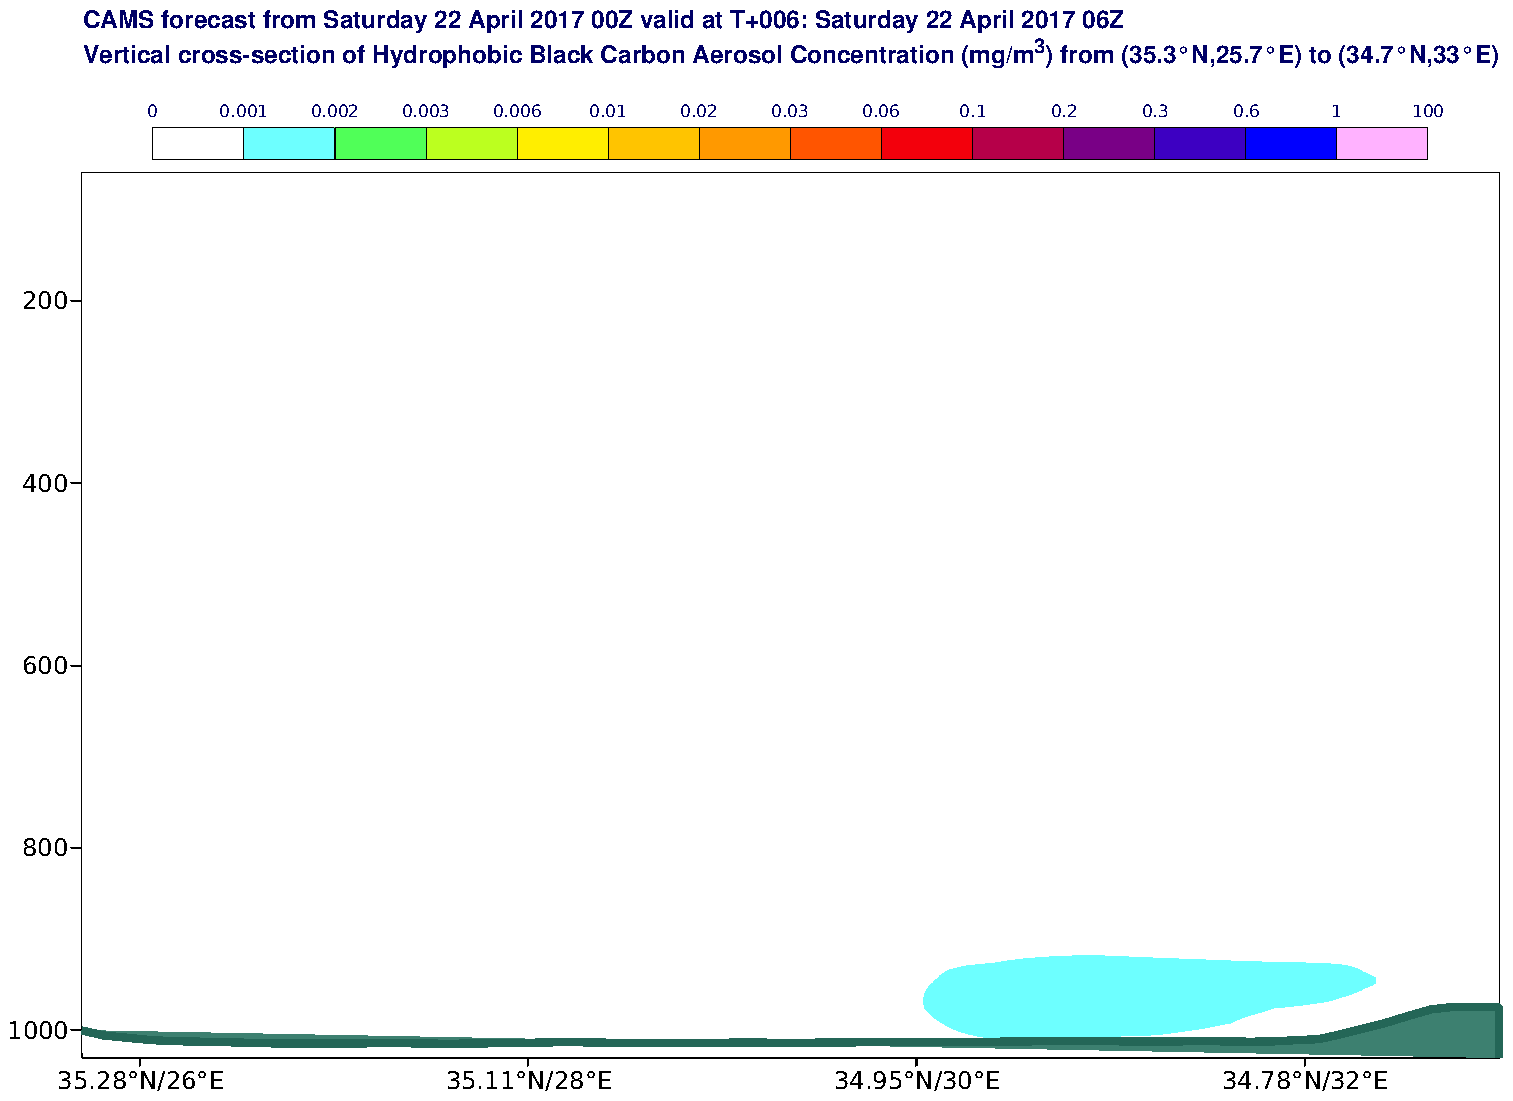 Vertical cross-section of Hydrophobic Black Carbon Aerosol Concentration (mg/m3) valid at T6 - 2017-04-22 06:00